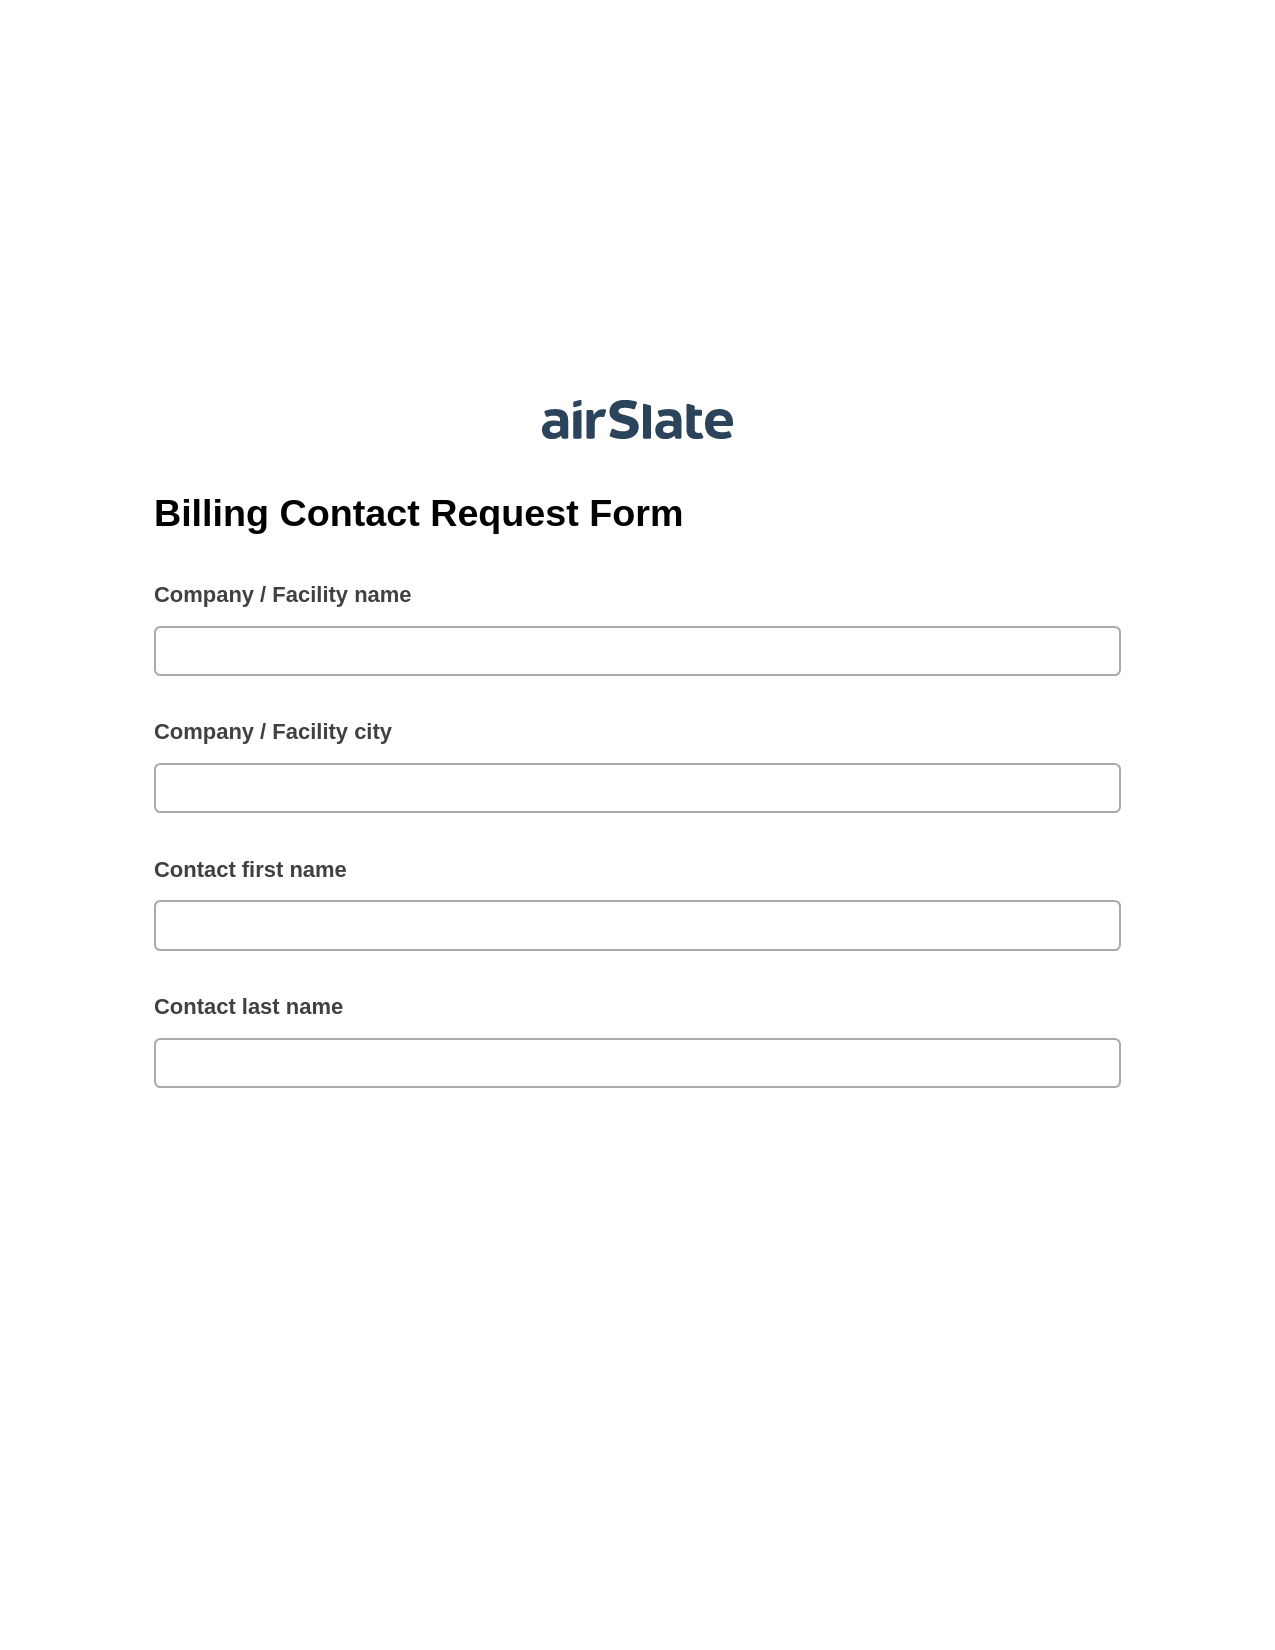 Multirole Billing Contact Request Form System Bot - Slack Two-Way Binding Bot, Send a Slate with Roles Bot, Google Drive Bot